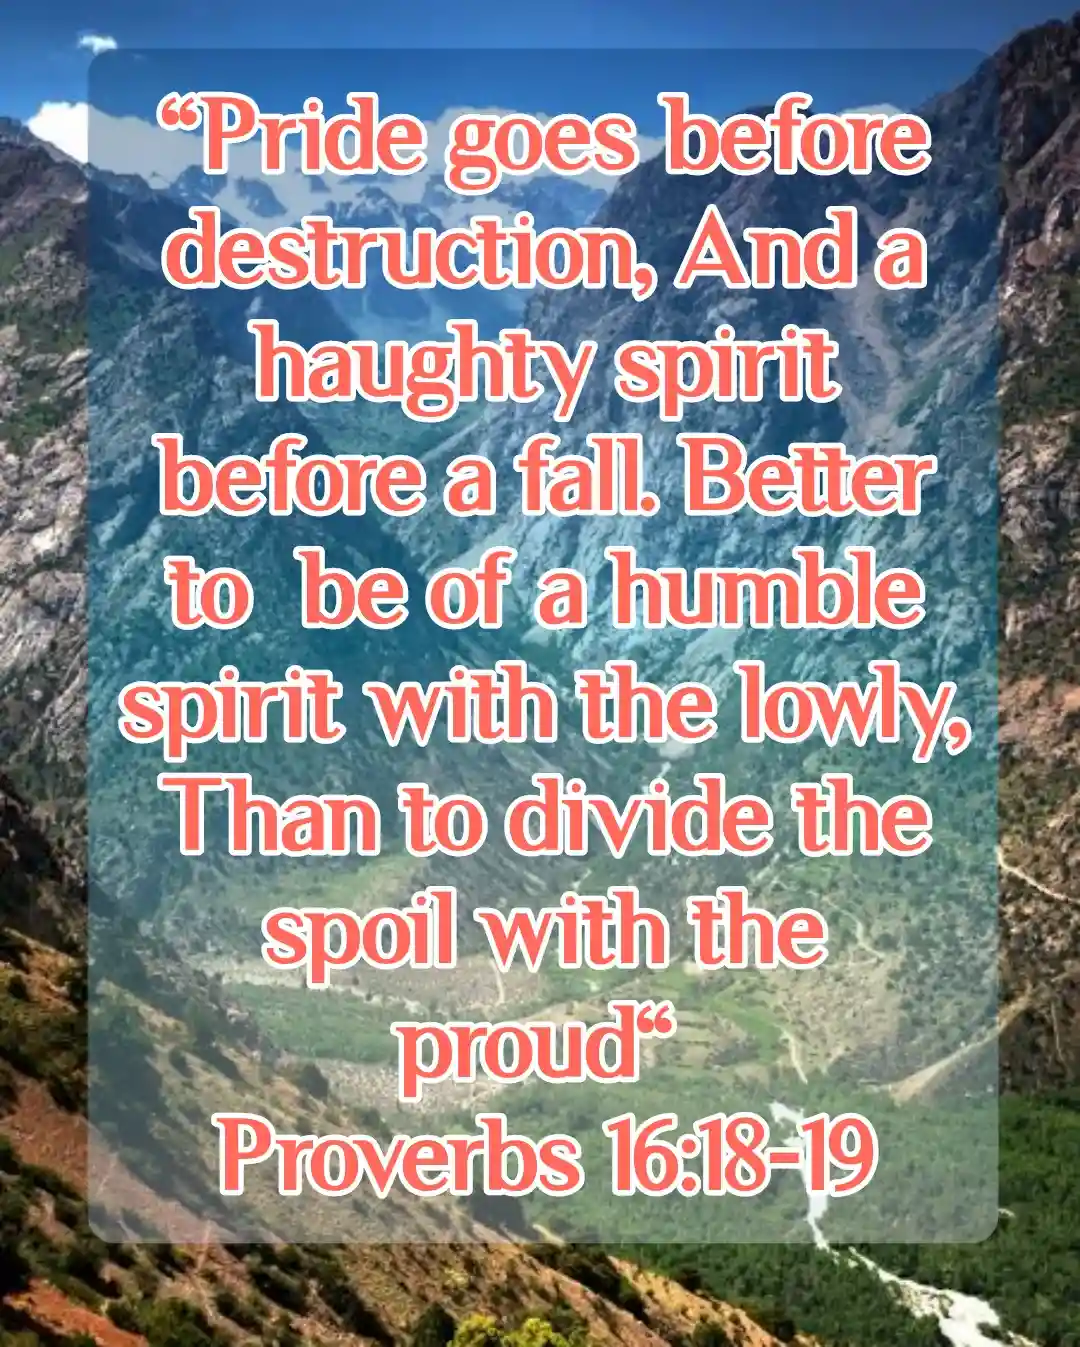 bible-verses-about-pride (Proverbs 16:18-19)